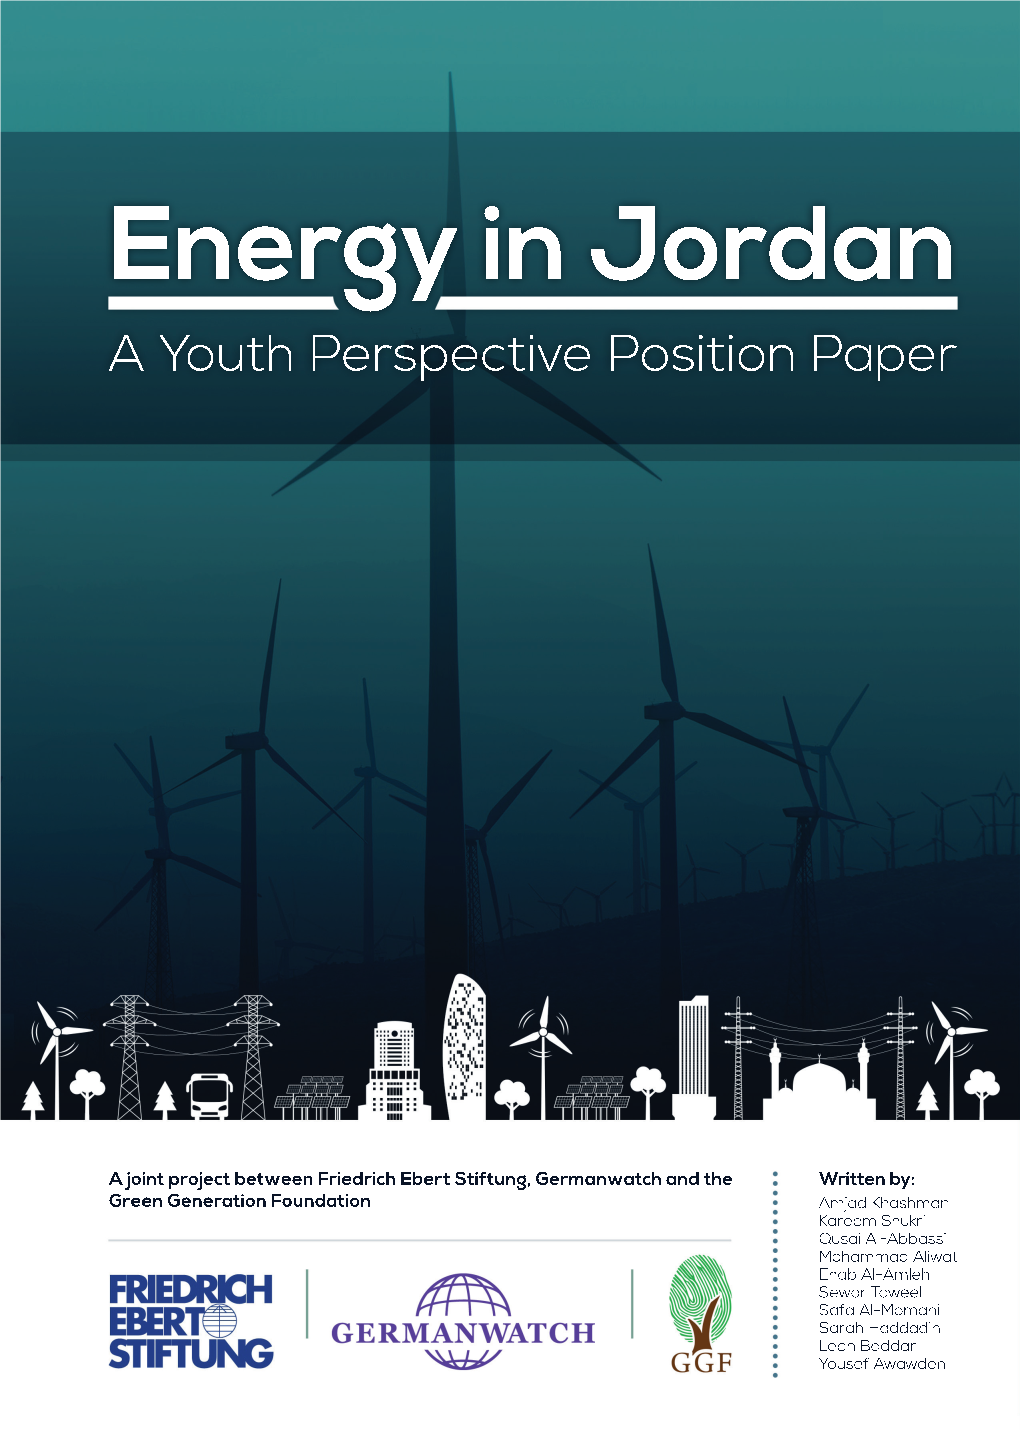 Energy in Jordan a Youth Perspective Position Paper